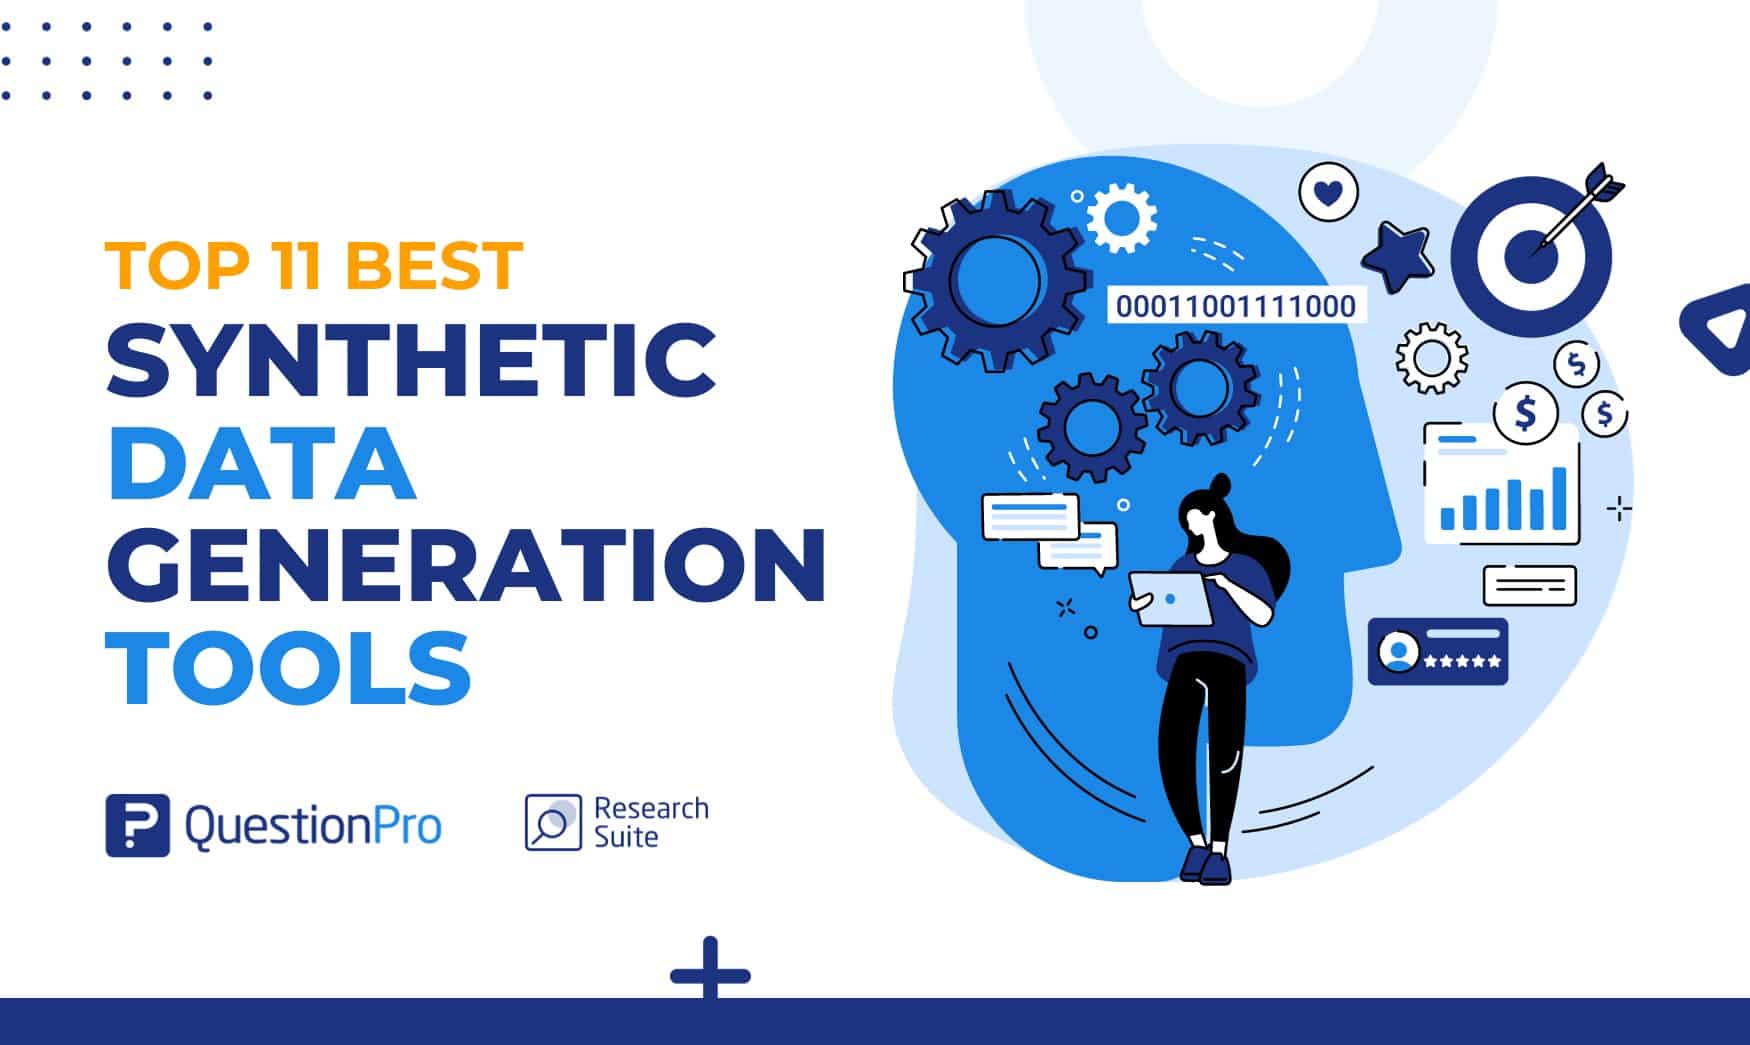 Discover the top 11 synthetic data generation tools for 2023. Explore the best solutions to generate realistic and privacy-preserving data.